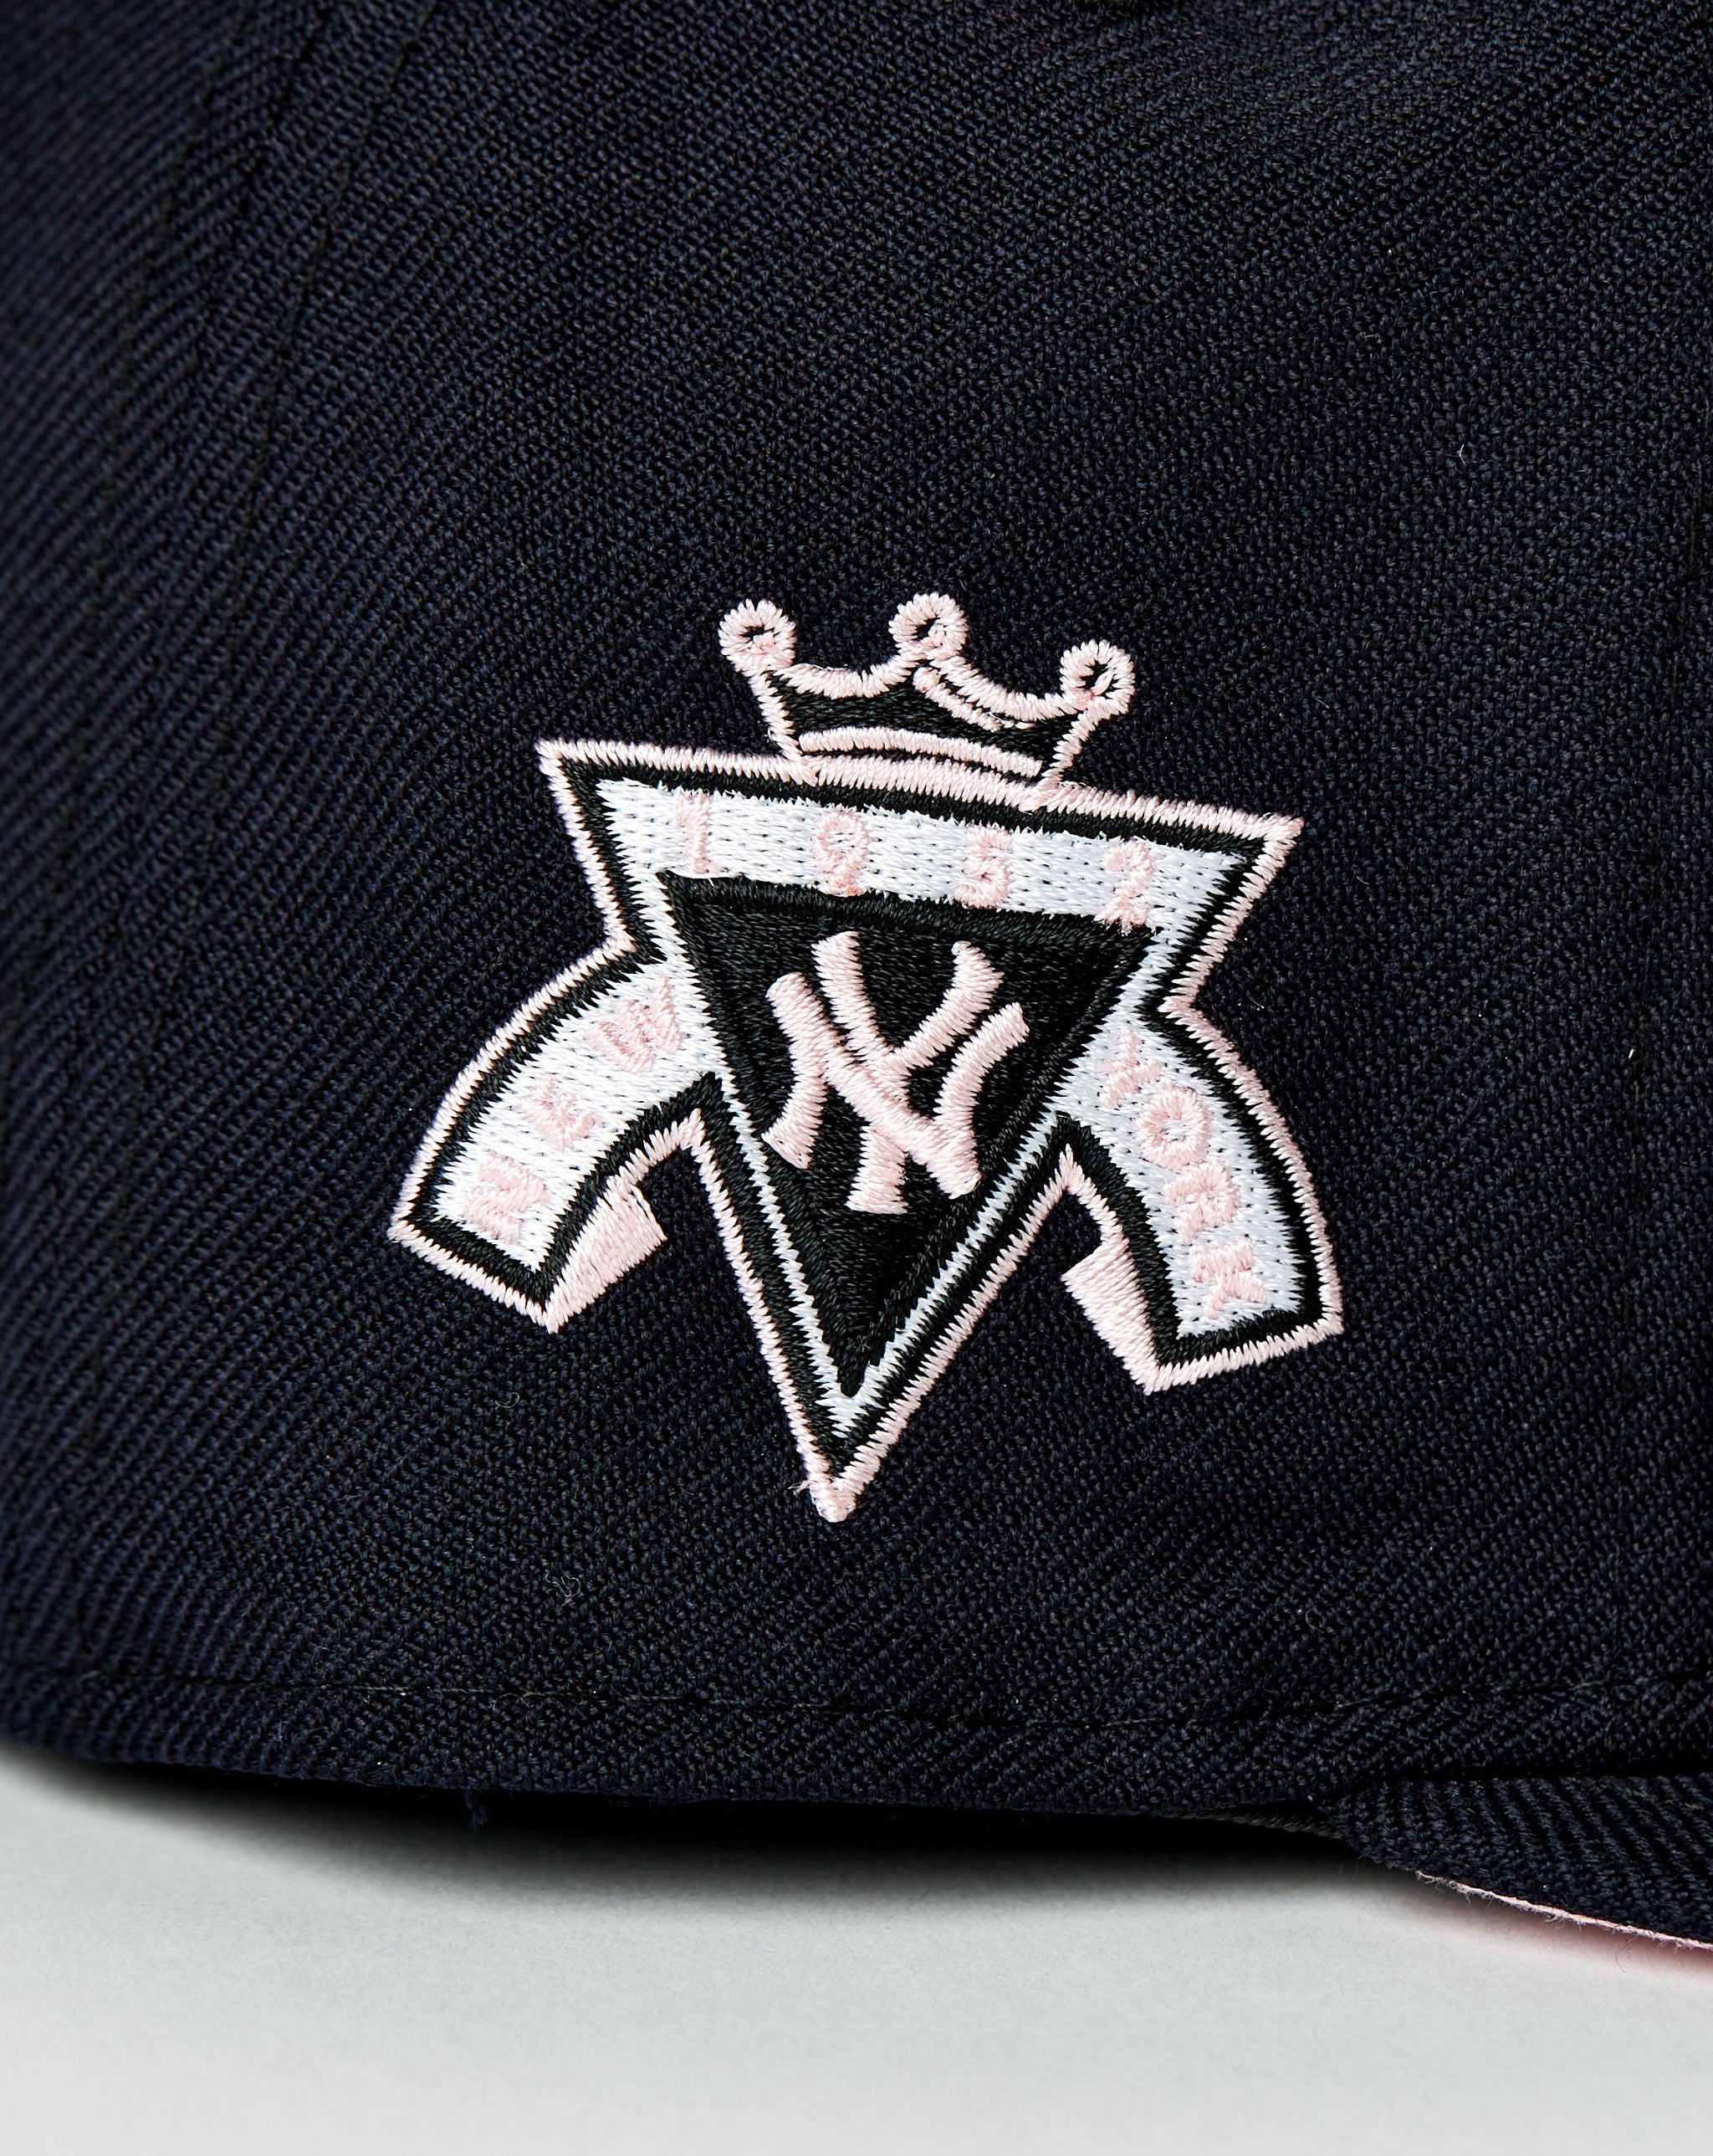 New Era Embroidered logo on the front  - Cheap Urlfreeze Jordan outlet